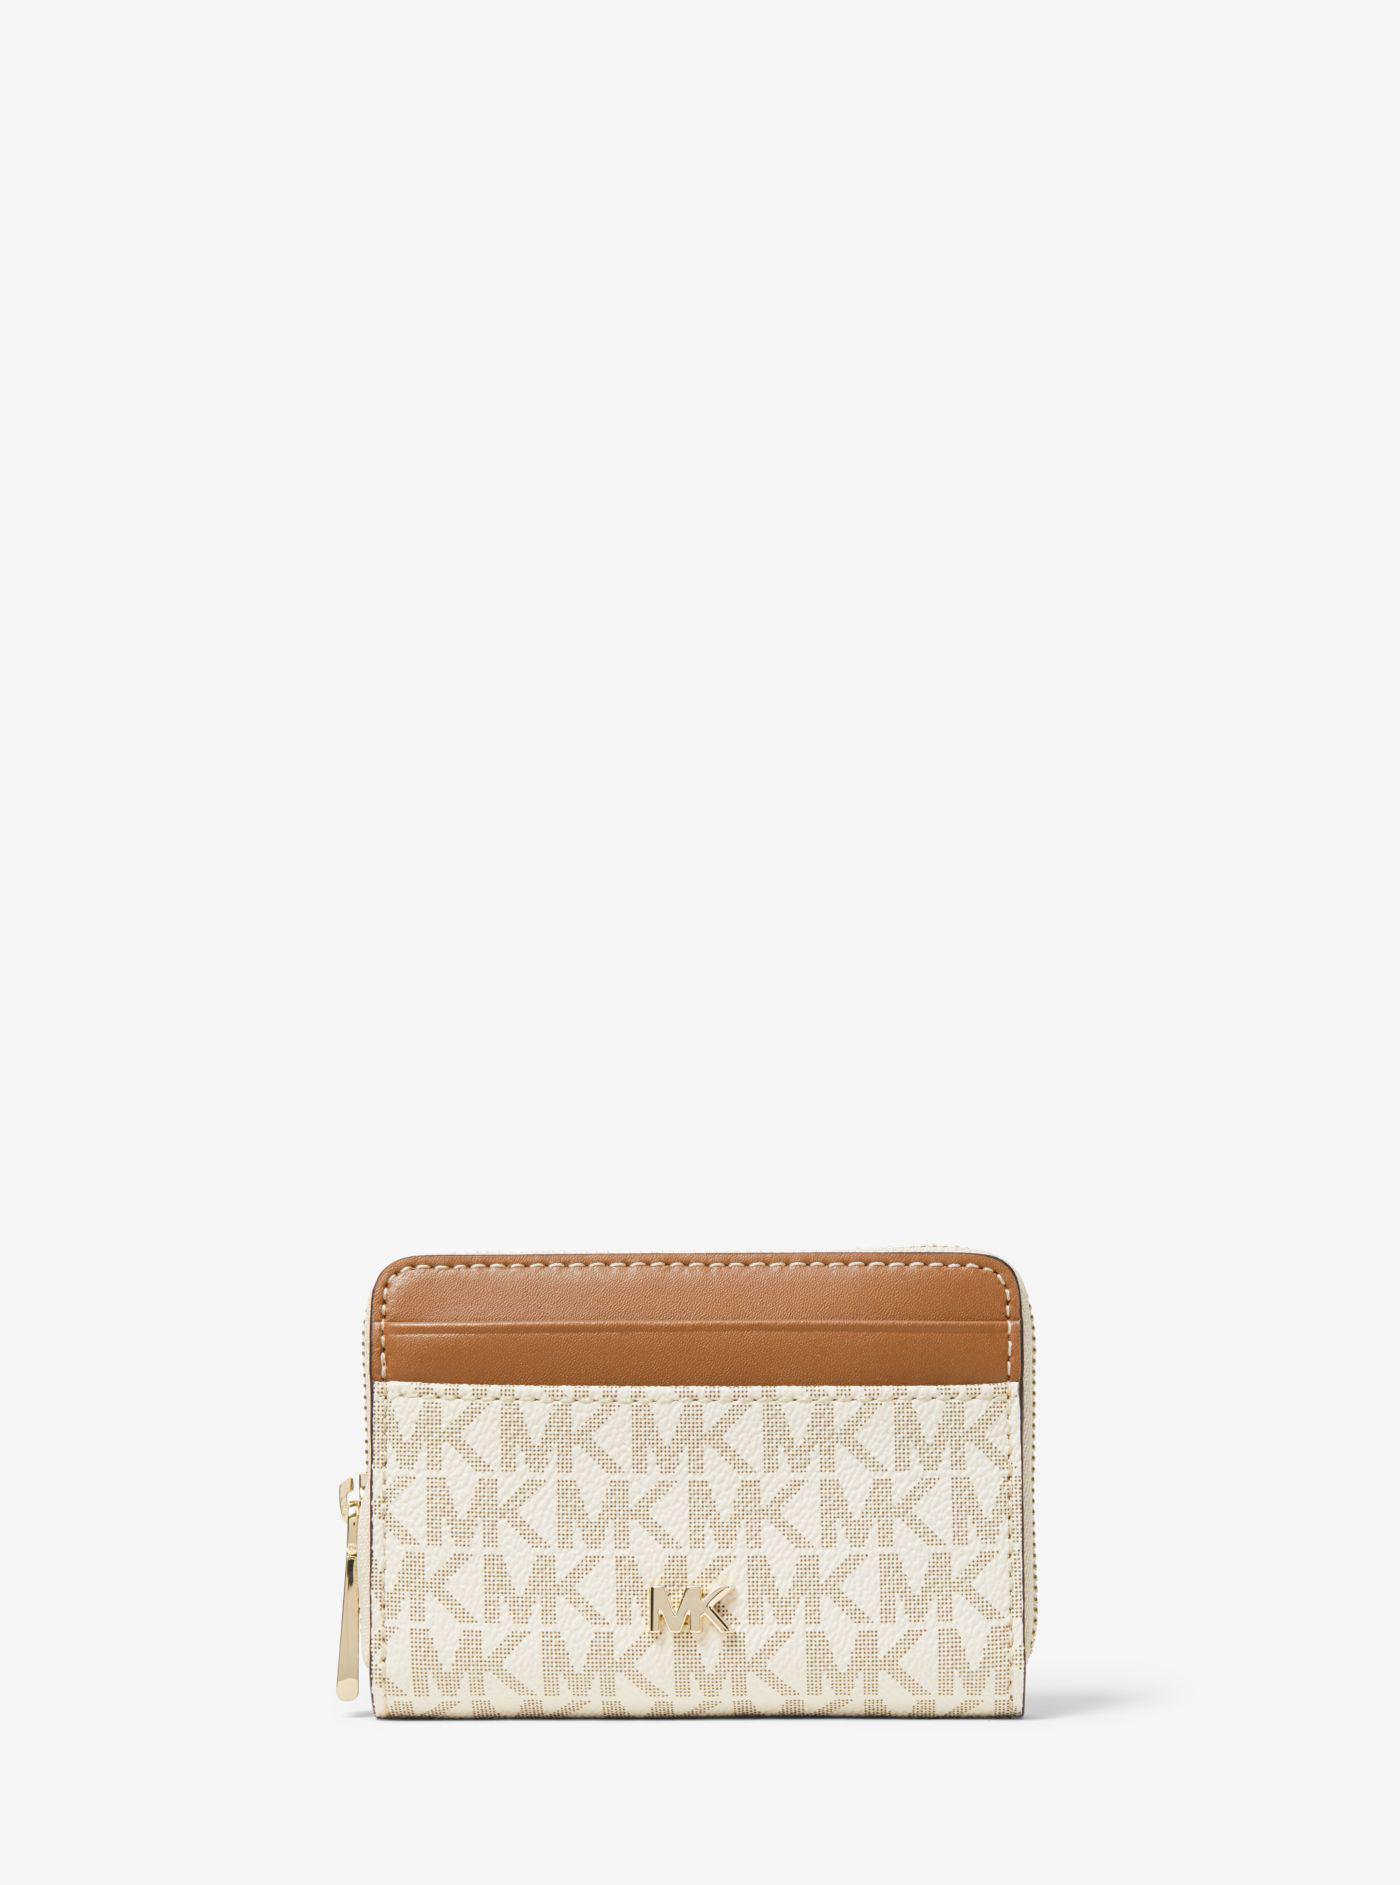 Michael Kors Small Logo And Leather Wallet in Brown - Lyst